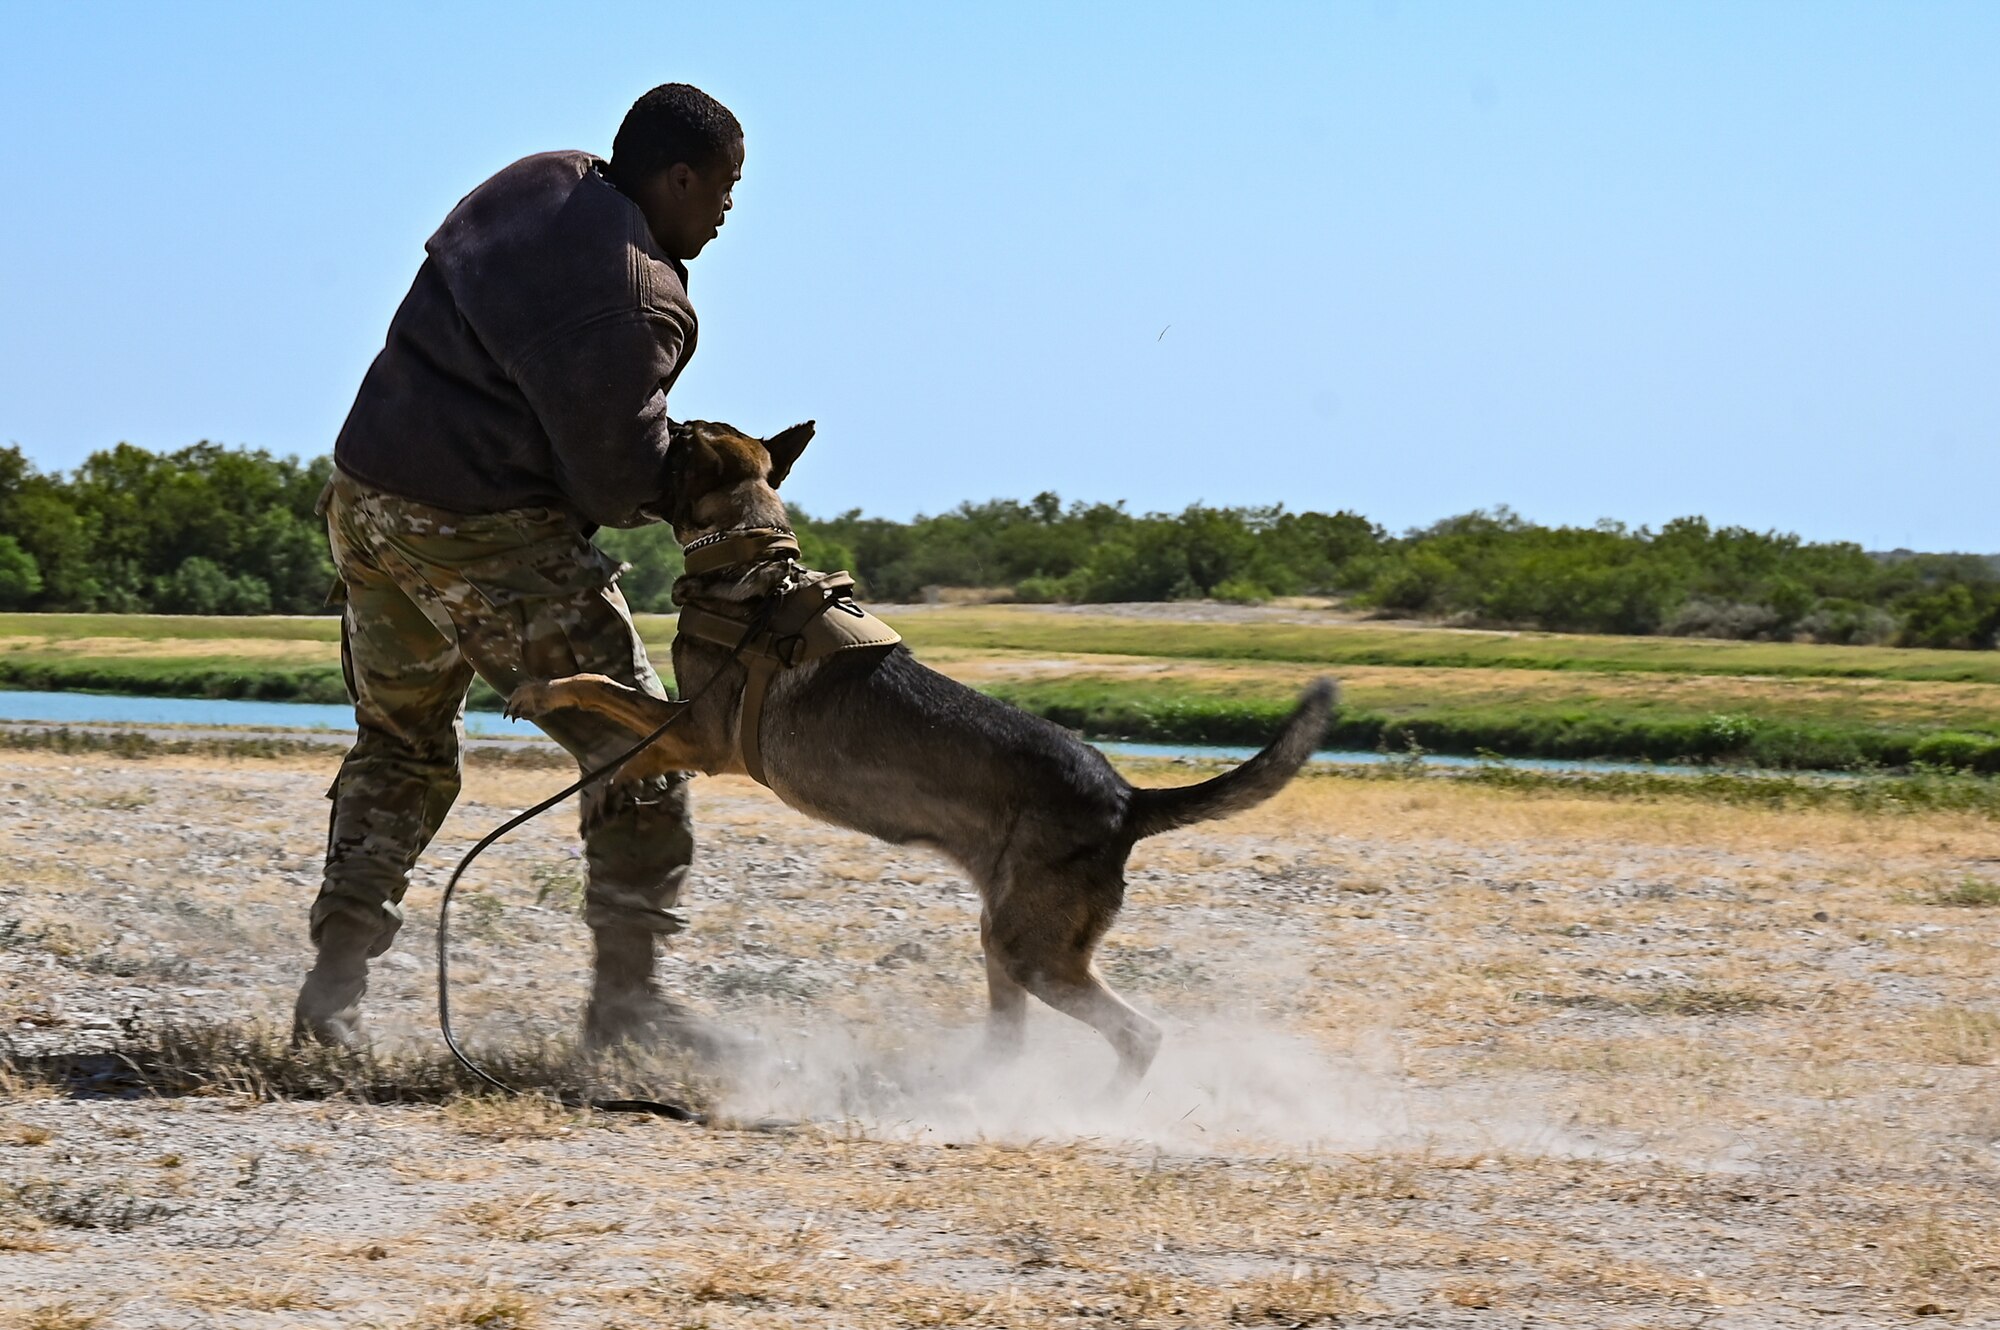 A U.S. Air Force Airman from the 47th Security Forces Squadron simulate K-9 protection capabilities during a base tour with the U.S. Border Patrol, Del Rio Sector leadership and the Val Verde County Sheriff's Department at Laughlin Air Force Base, Texas, Aug. 4, 2023. The K-9 demonstration showcased the capabilities and preparedness of Laughlin’s Defenders. (U.S. Air Force photo by Airman 1st Class Keira Rossman)